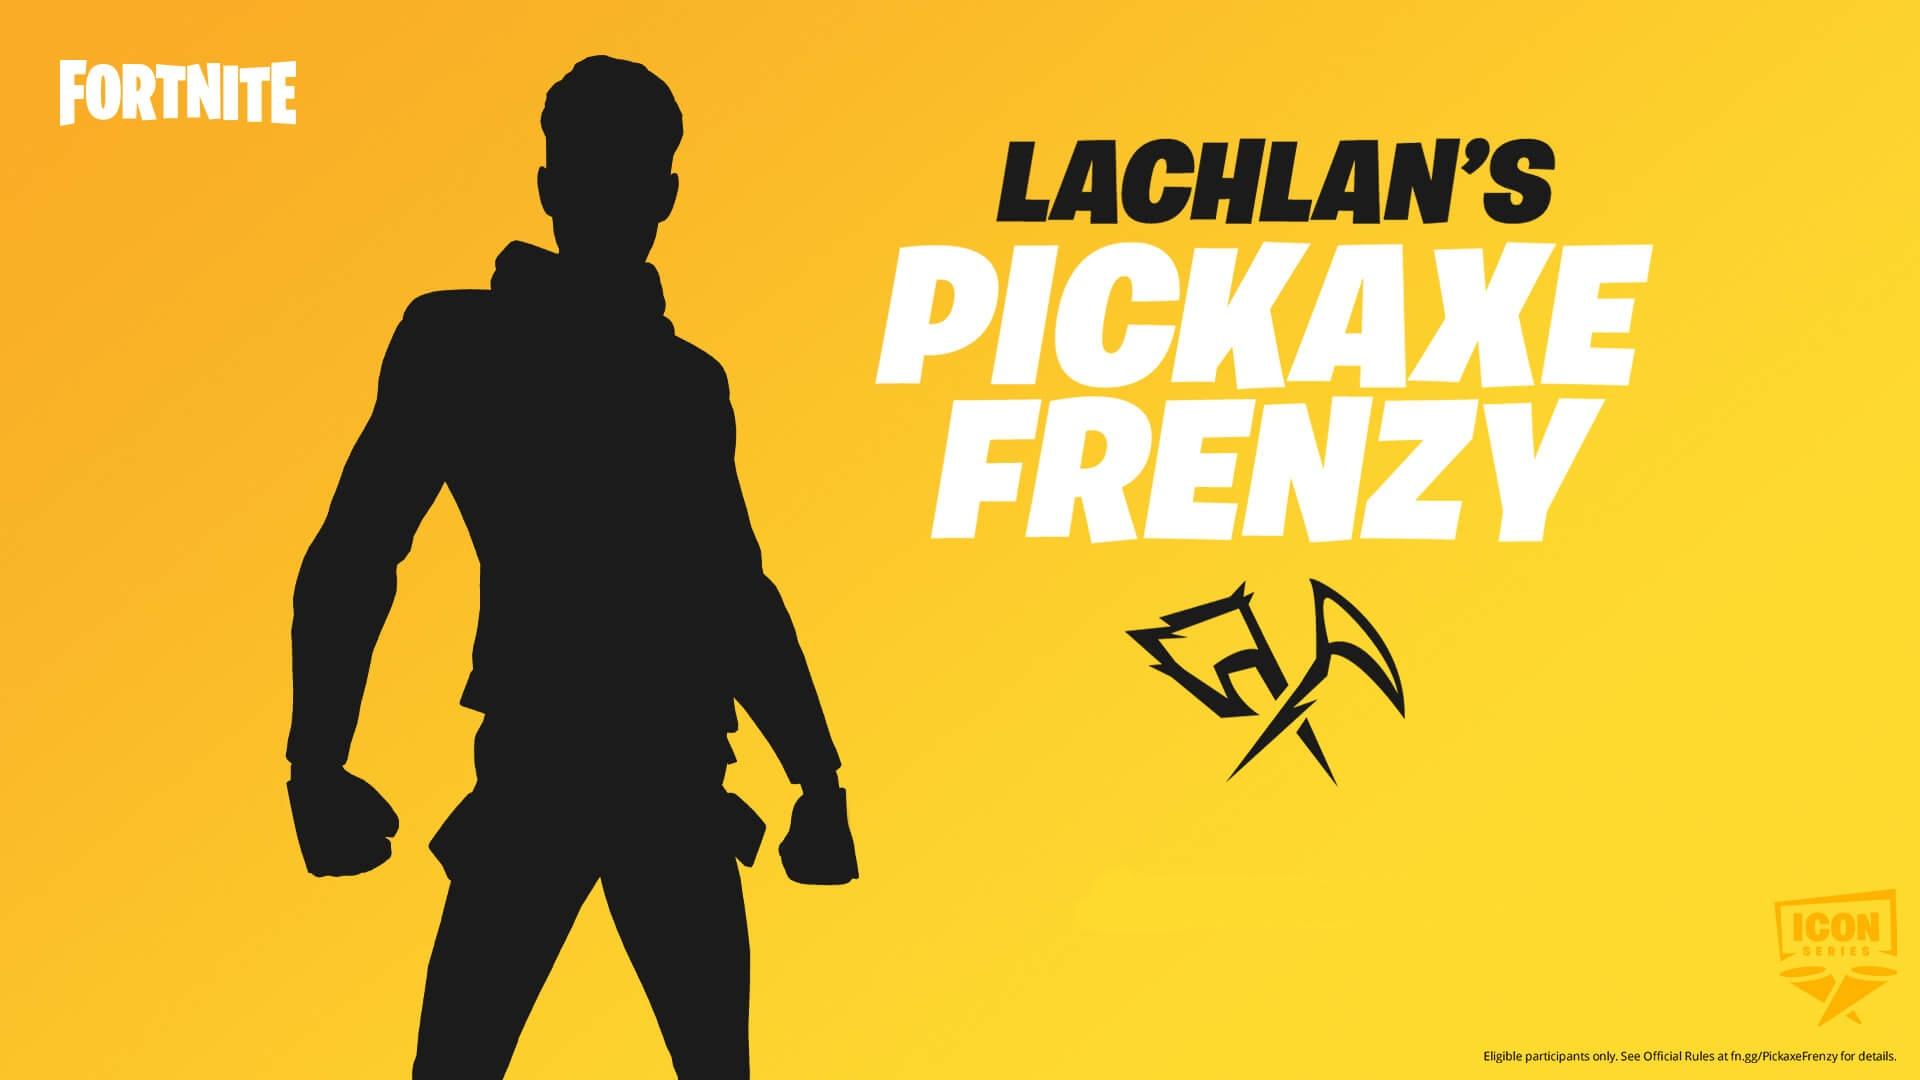 Fortnite Lachlan Pickaxe Frenzy tournament early access new skin